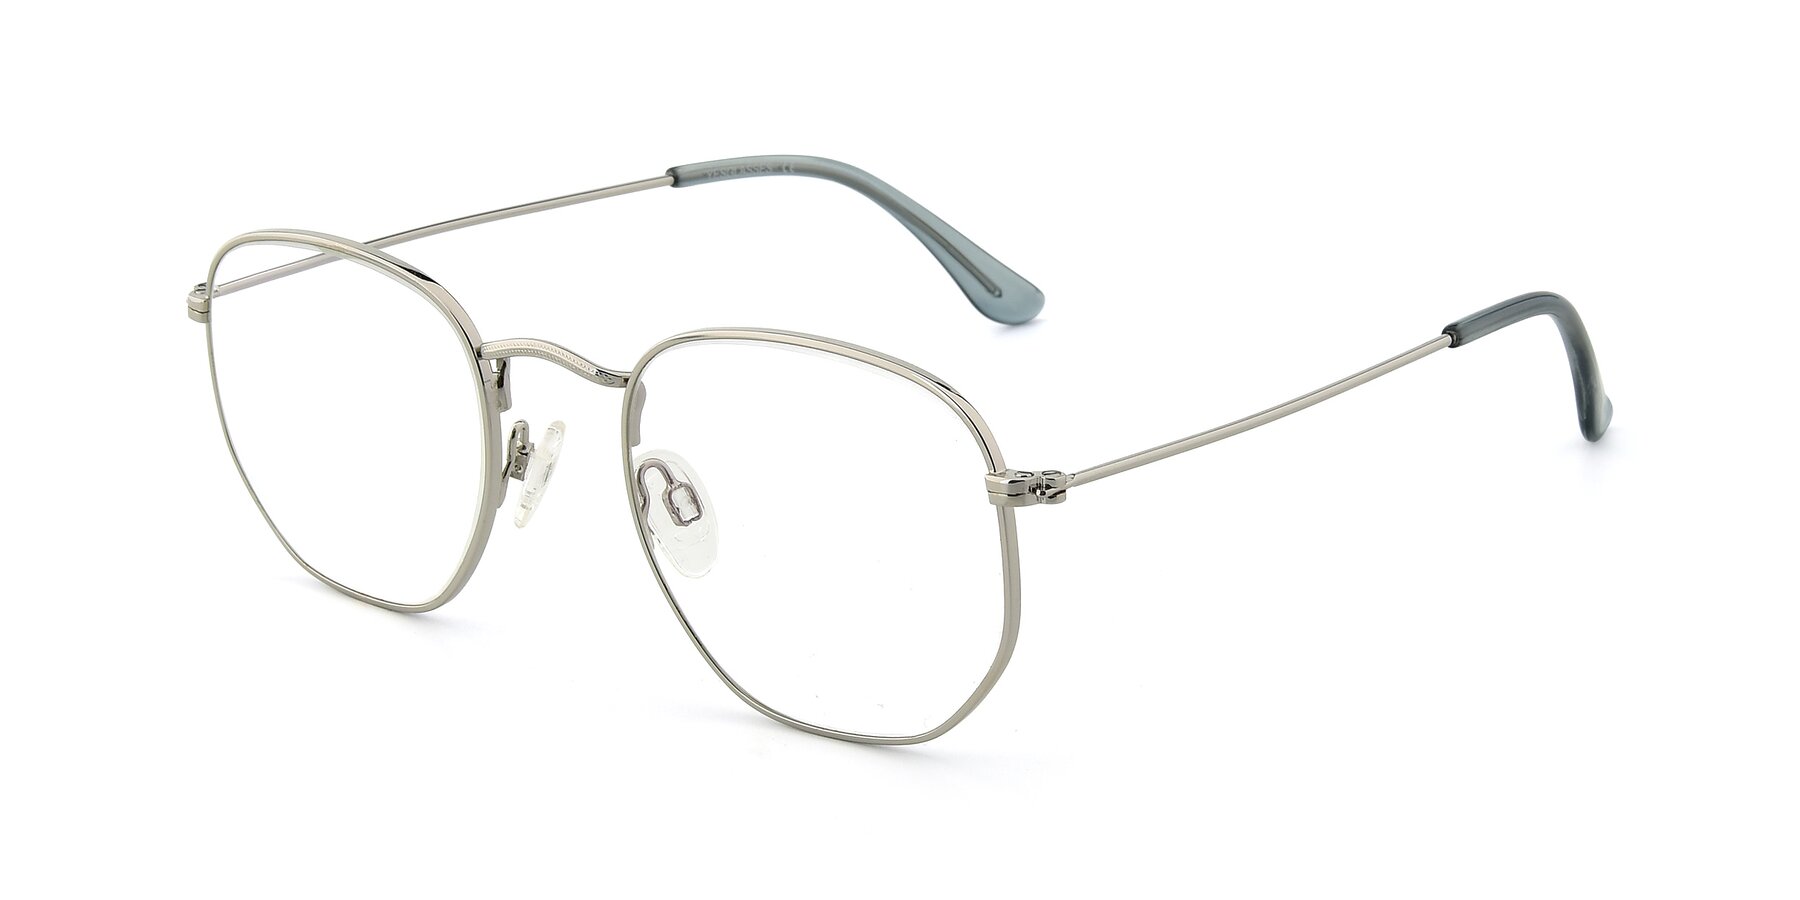 Angle of SSR1943 in Silver with Clear Eyeglass Lenses